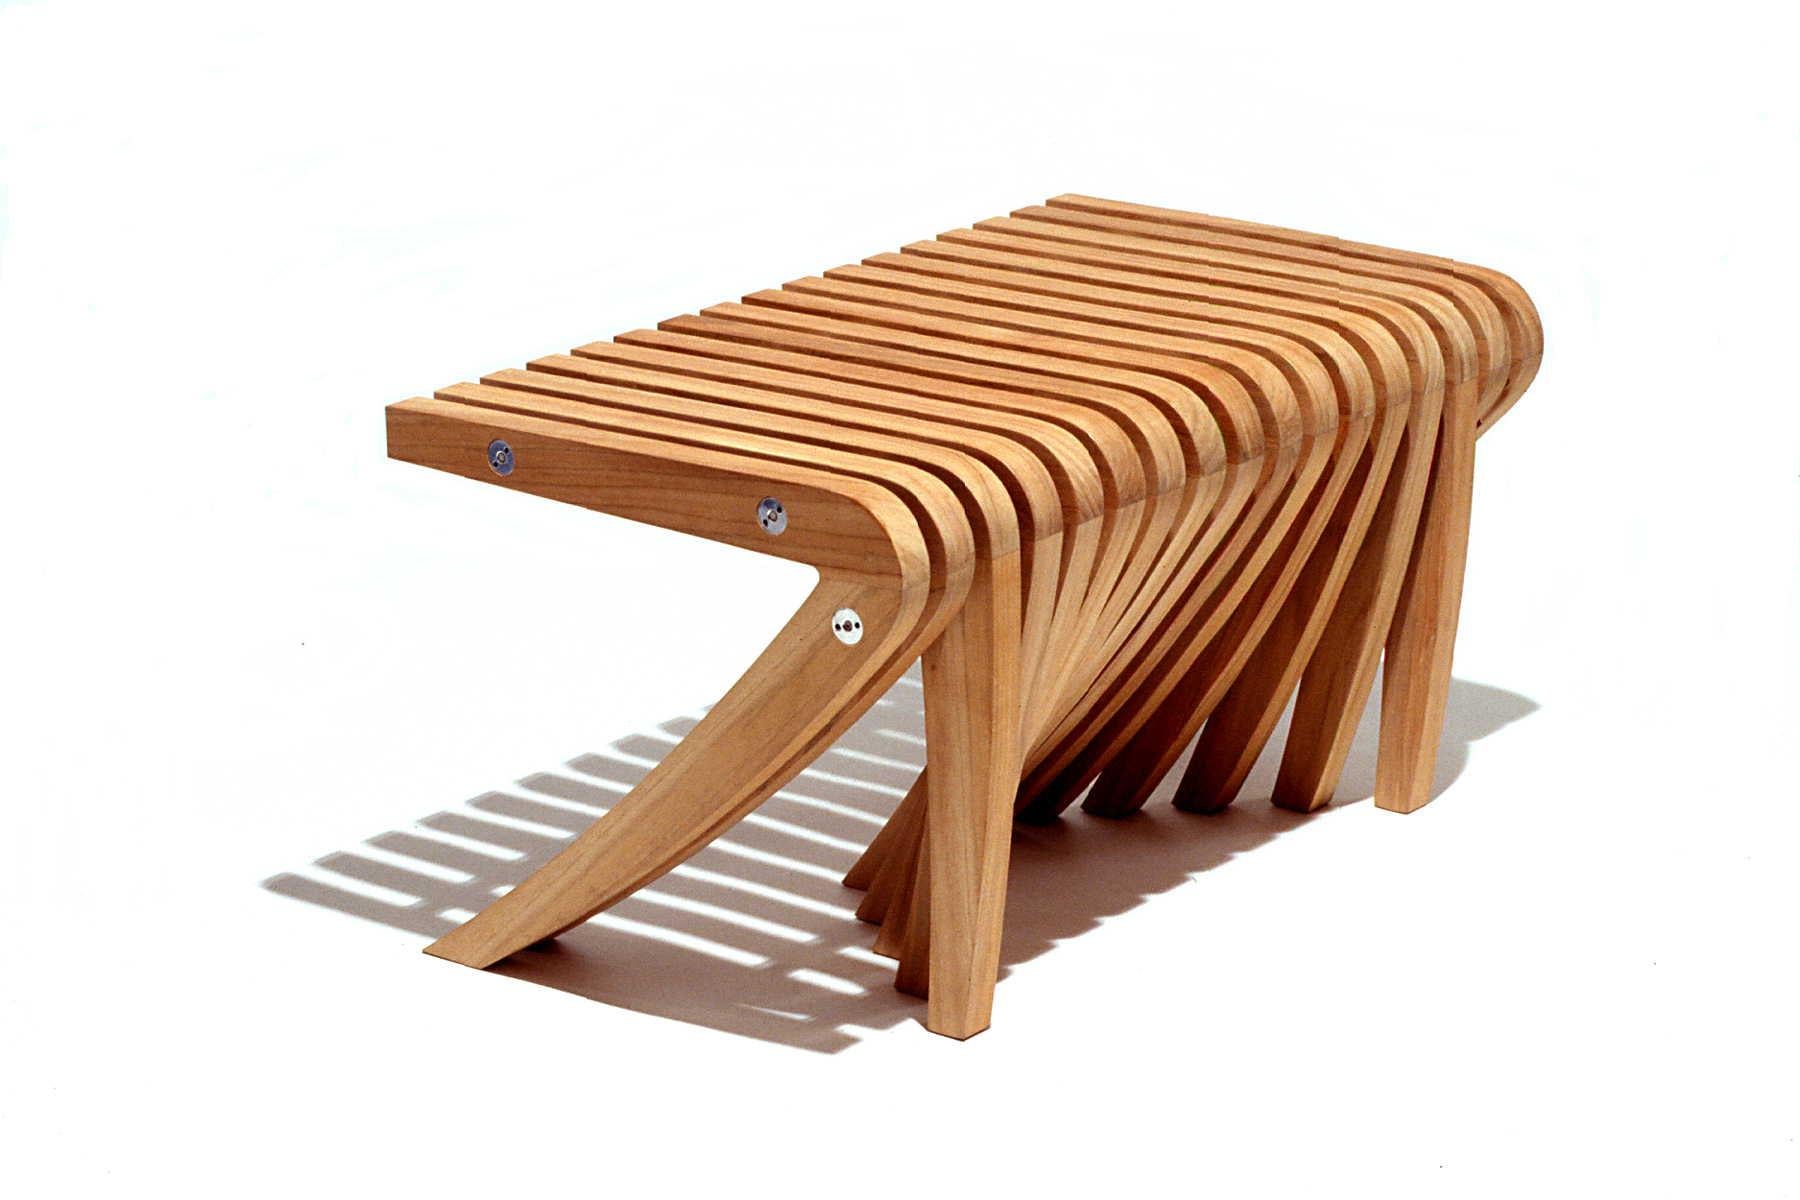 Beautiful, comfortable, and practical backless bench by Diamond Tropical Hardwoods. It can be used in a shower, outdoors or indoors. It is made with marine grade 100% heartwood teak and has marine grade stainless steel hardware. Designed by Robert